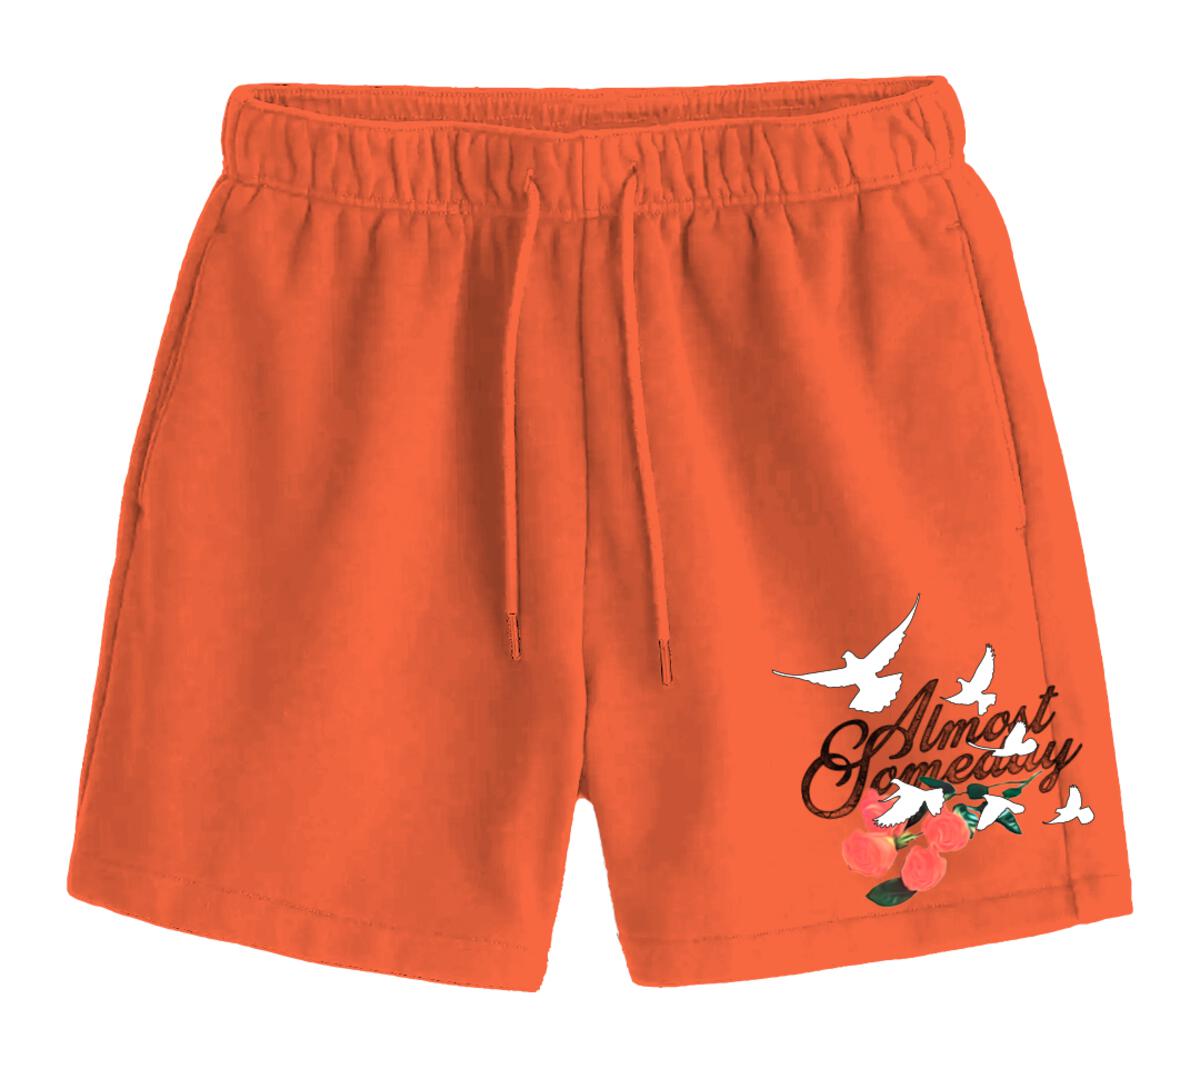 Almost Someday "PURGATORY Terry SHORTS"